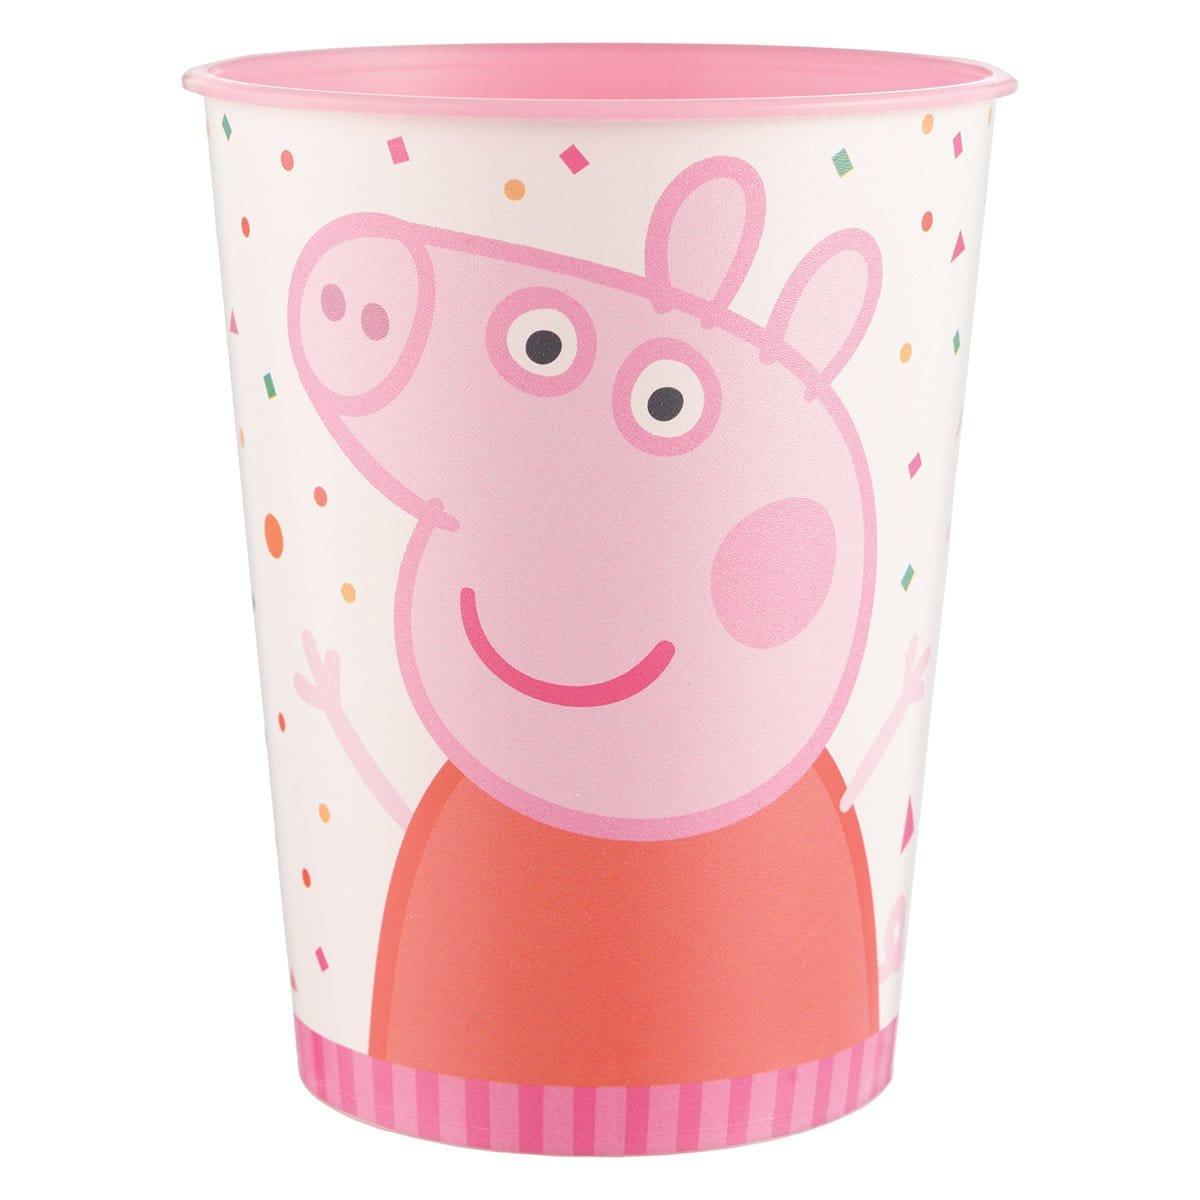 Buy Kids Birthday Peppa Pig Confetti Plastic Favor Cup sold at Party Expert